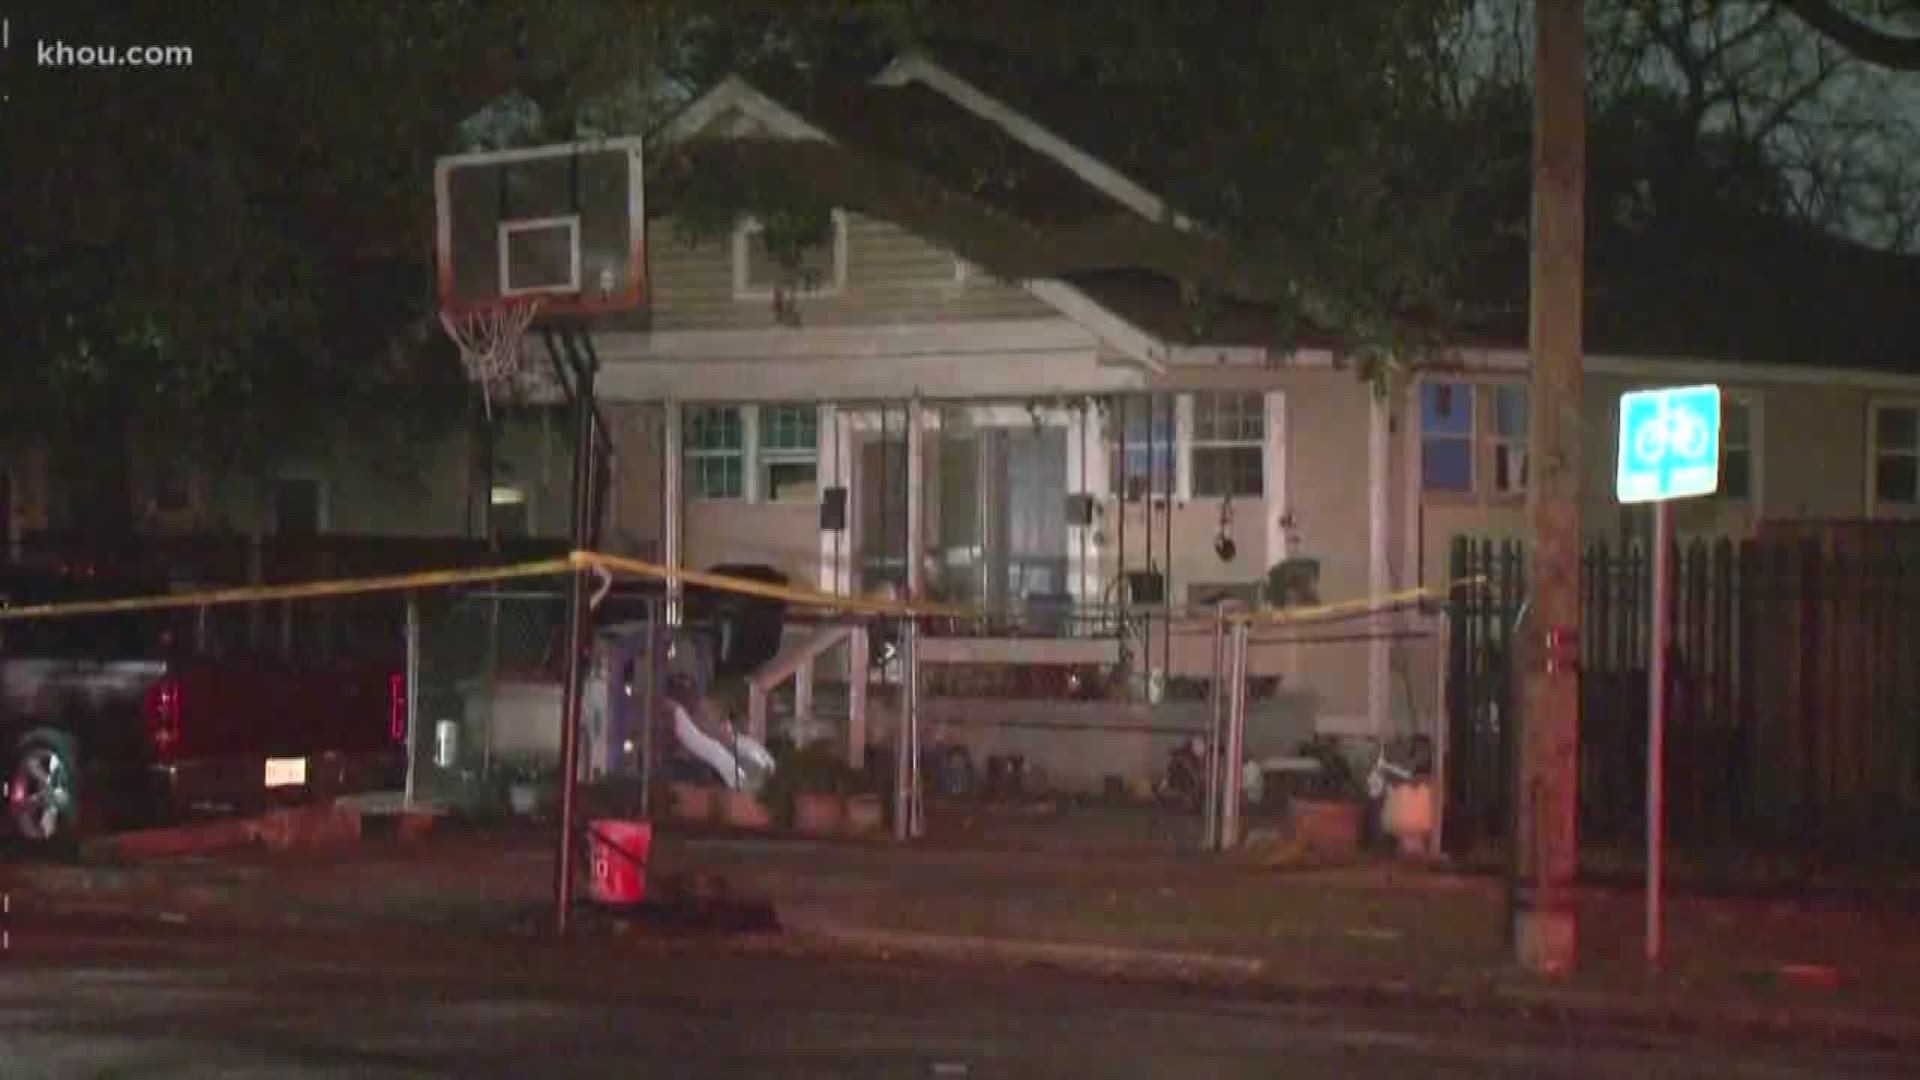 HPD says three people are dead and another is injured after they broke into a home overnight.